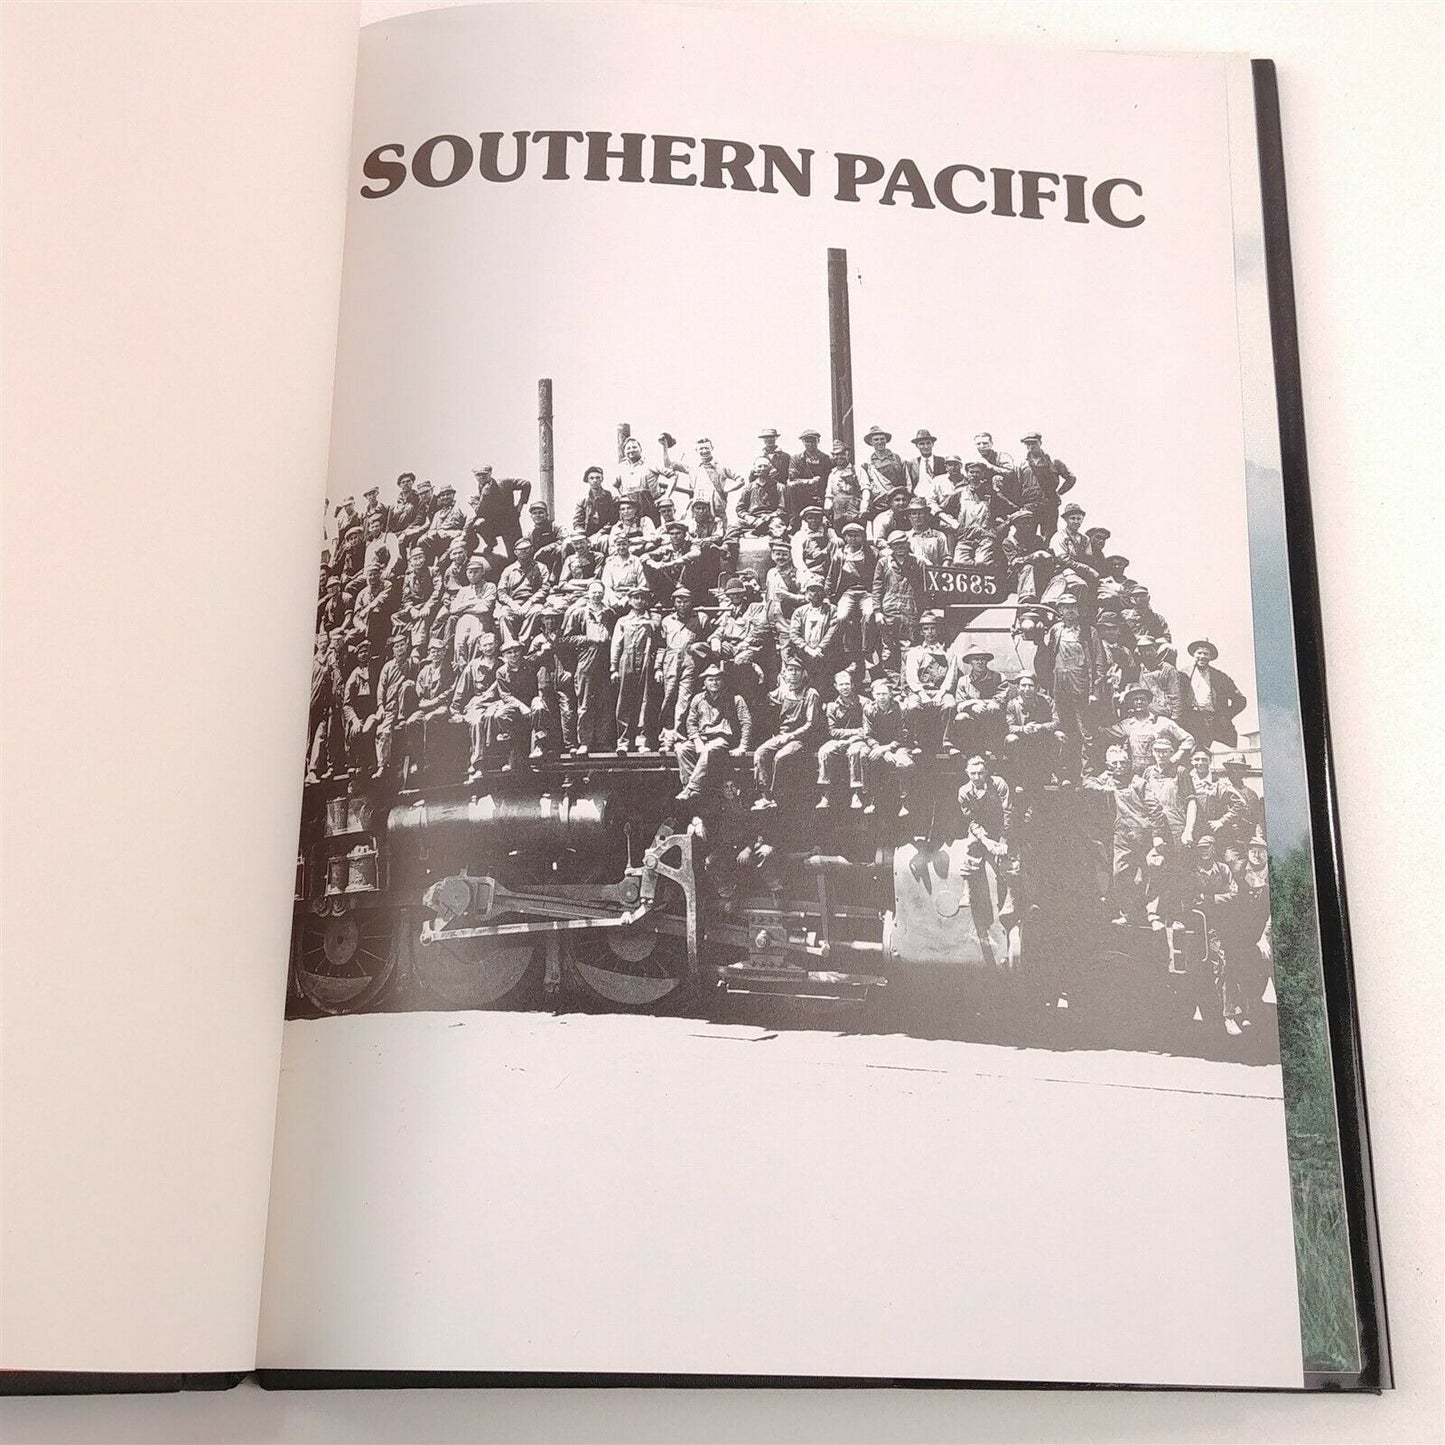 The History of the Southern Pacific Bill Yenne Hardcover Book Dj 1985